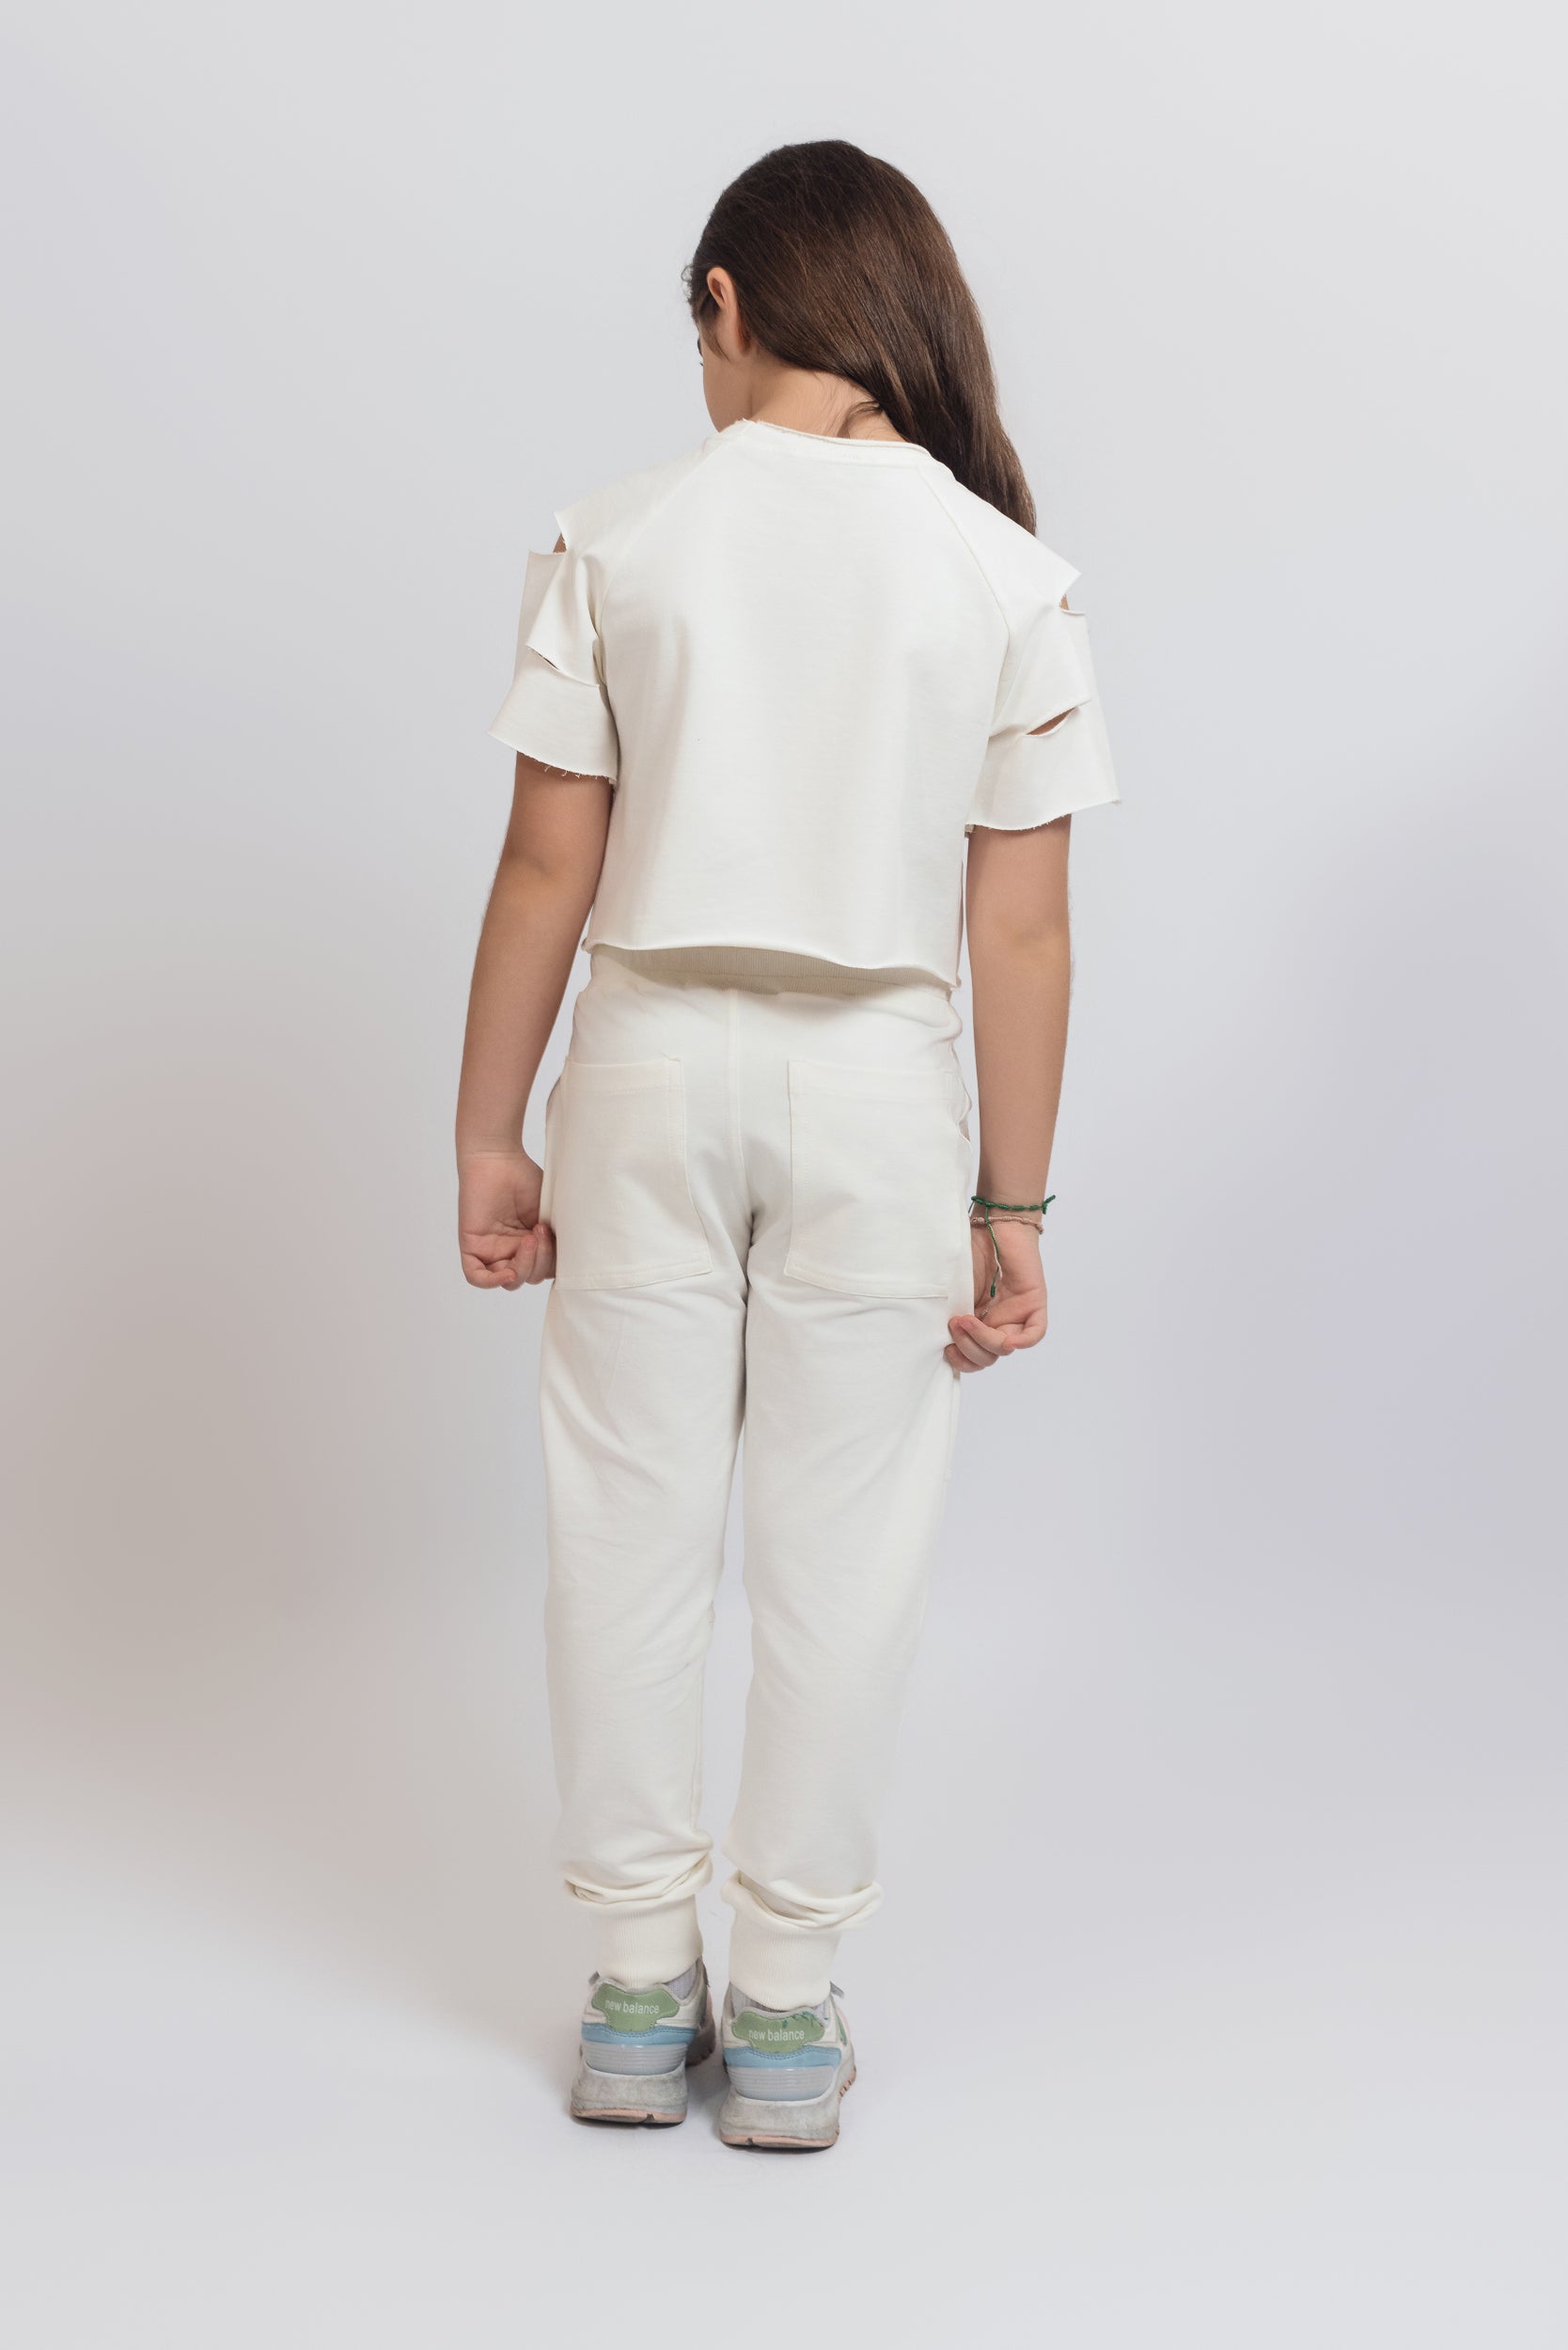 Seashell Crop Top Cutout Sleeves For Girls - Off White